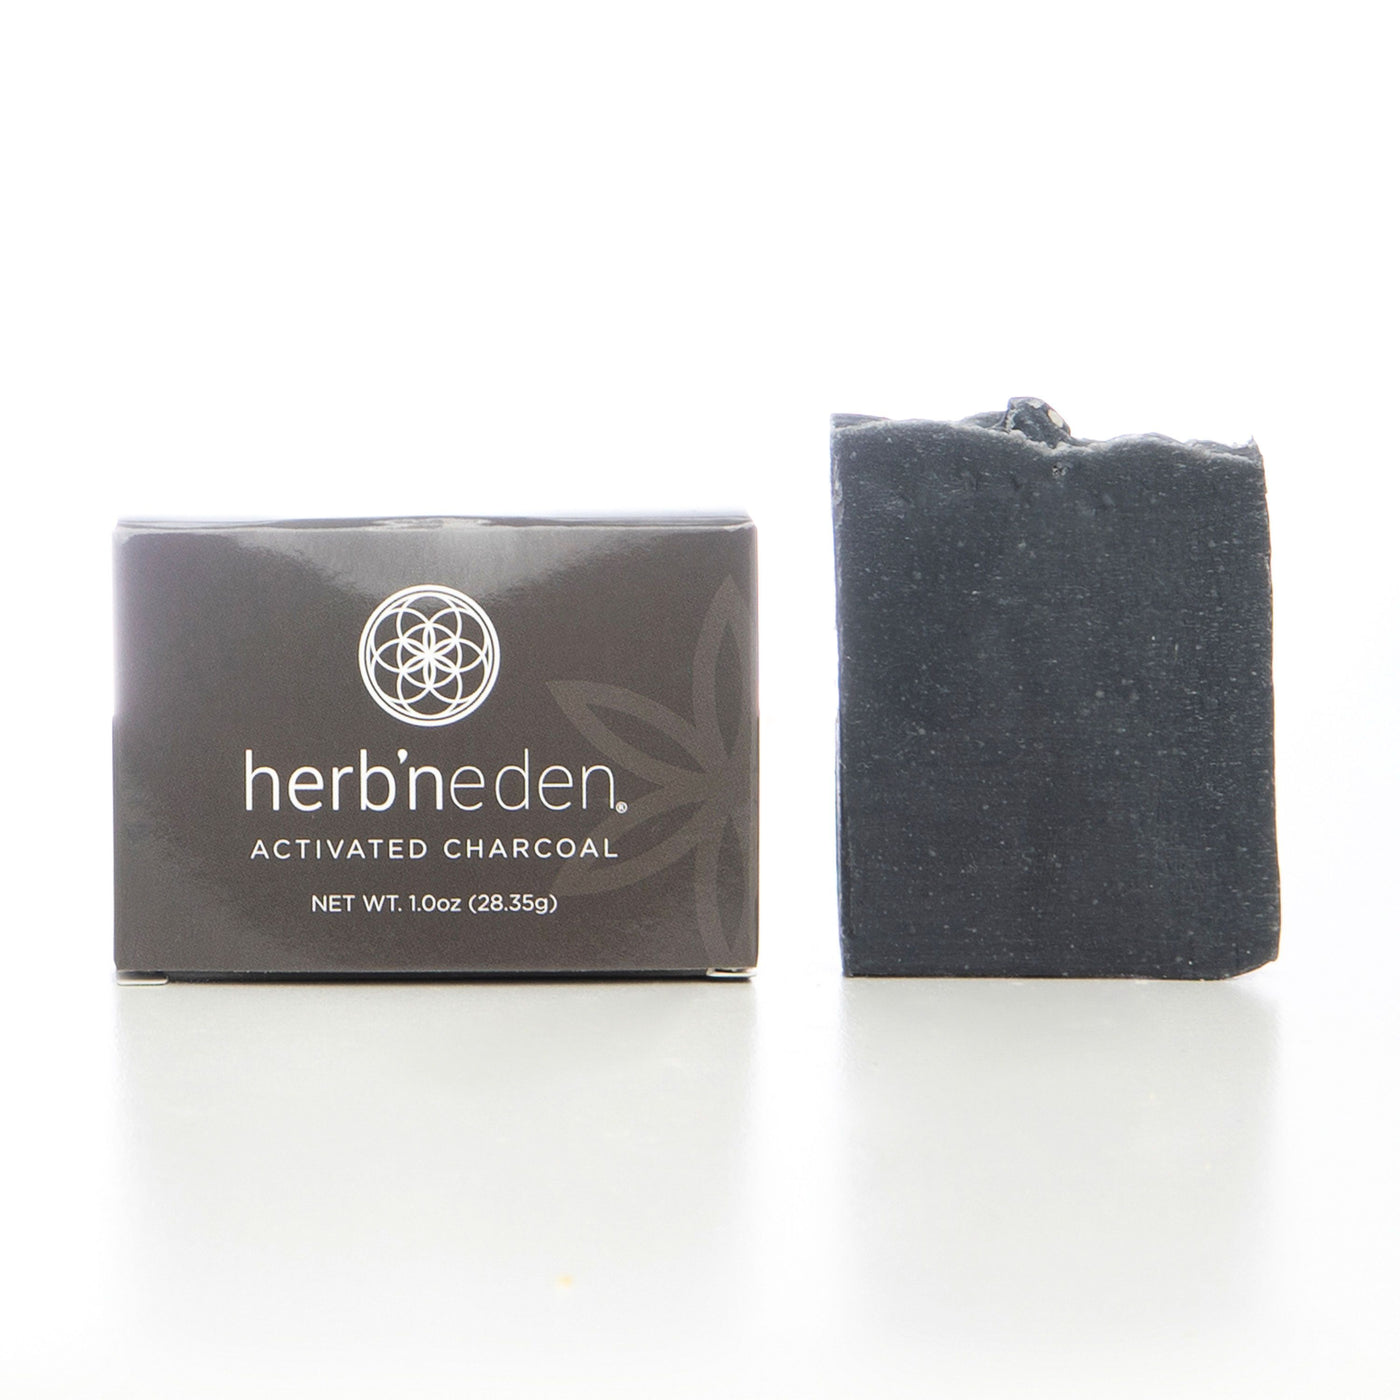 Activated Charcoal (included in the bundle)